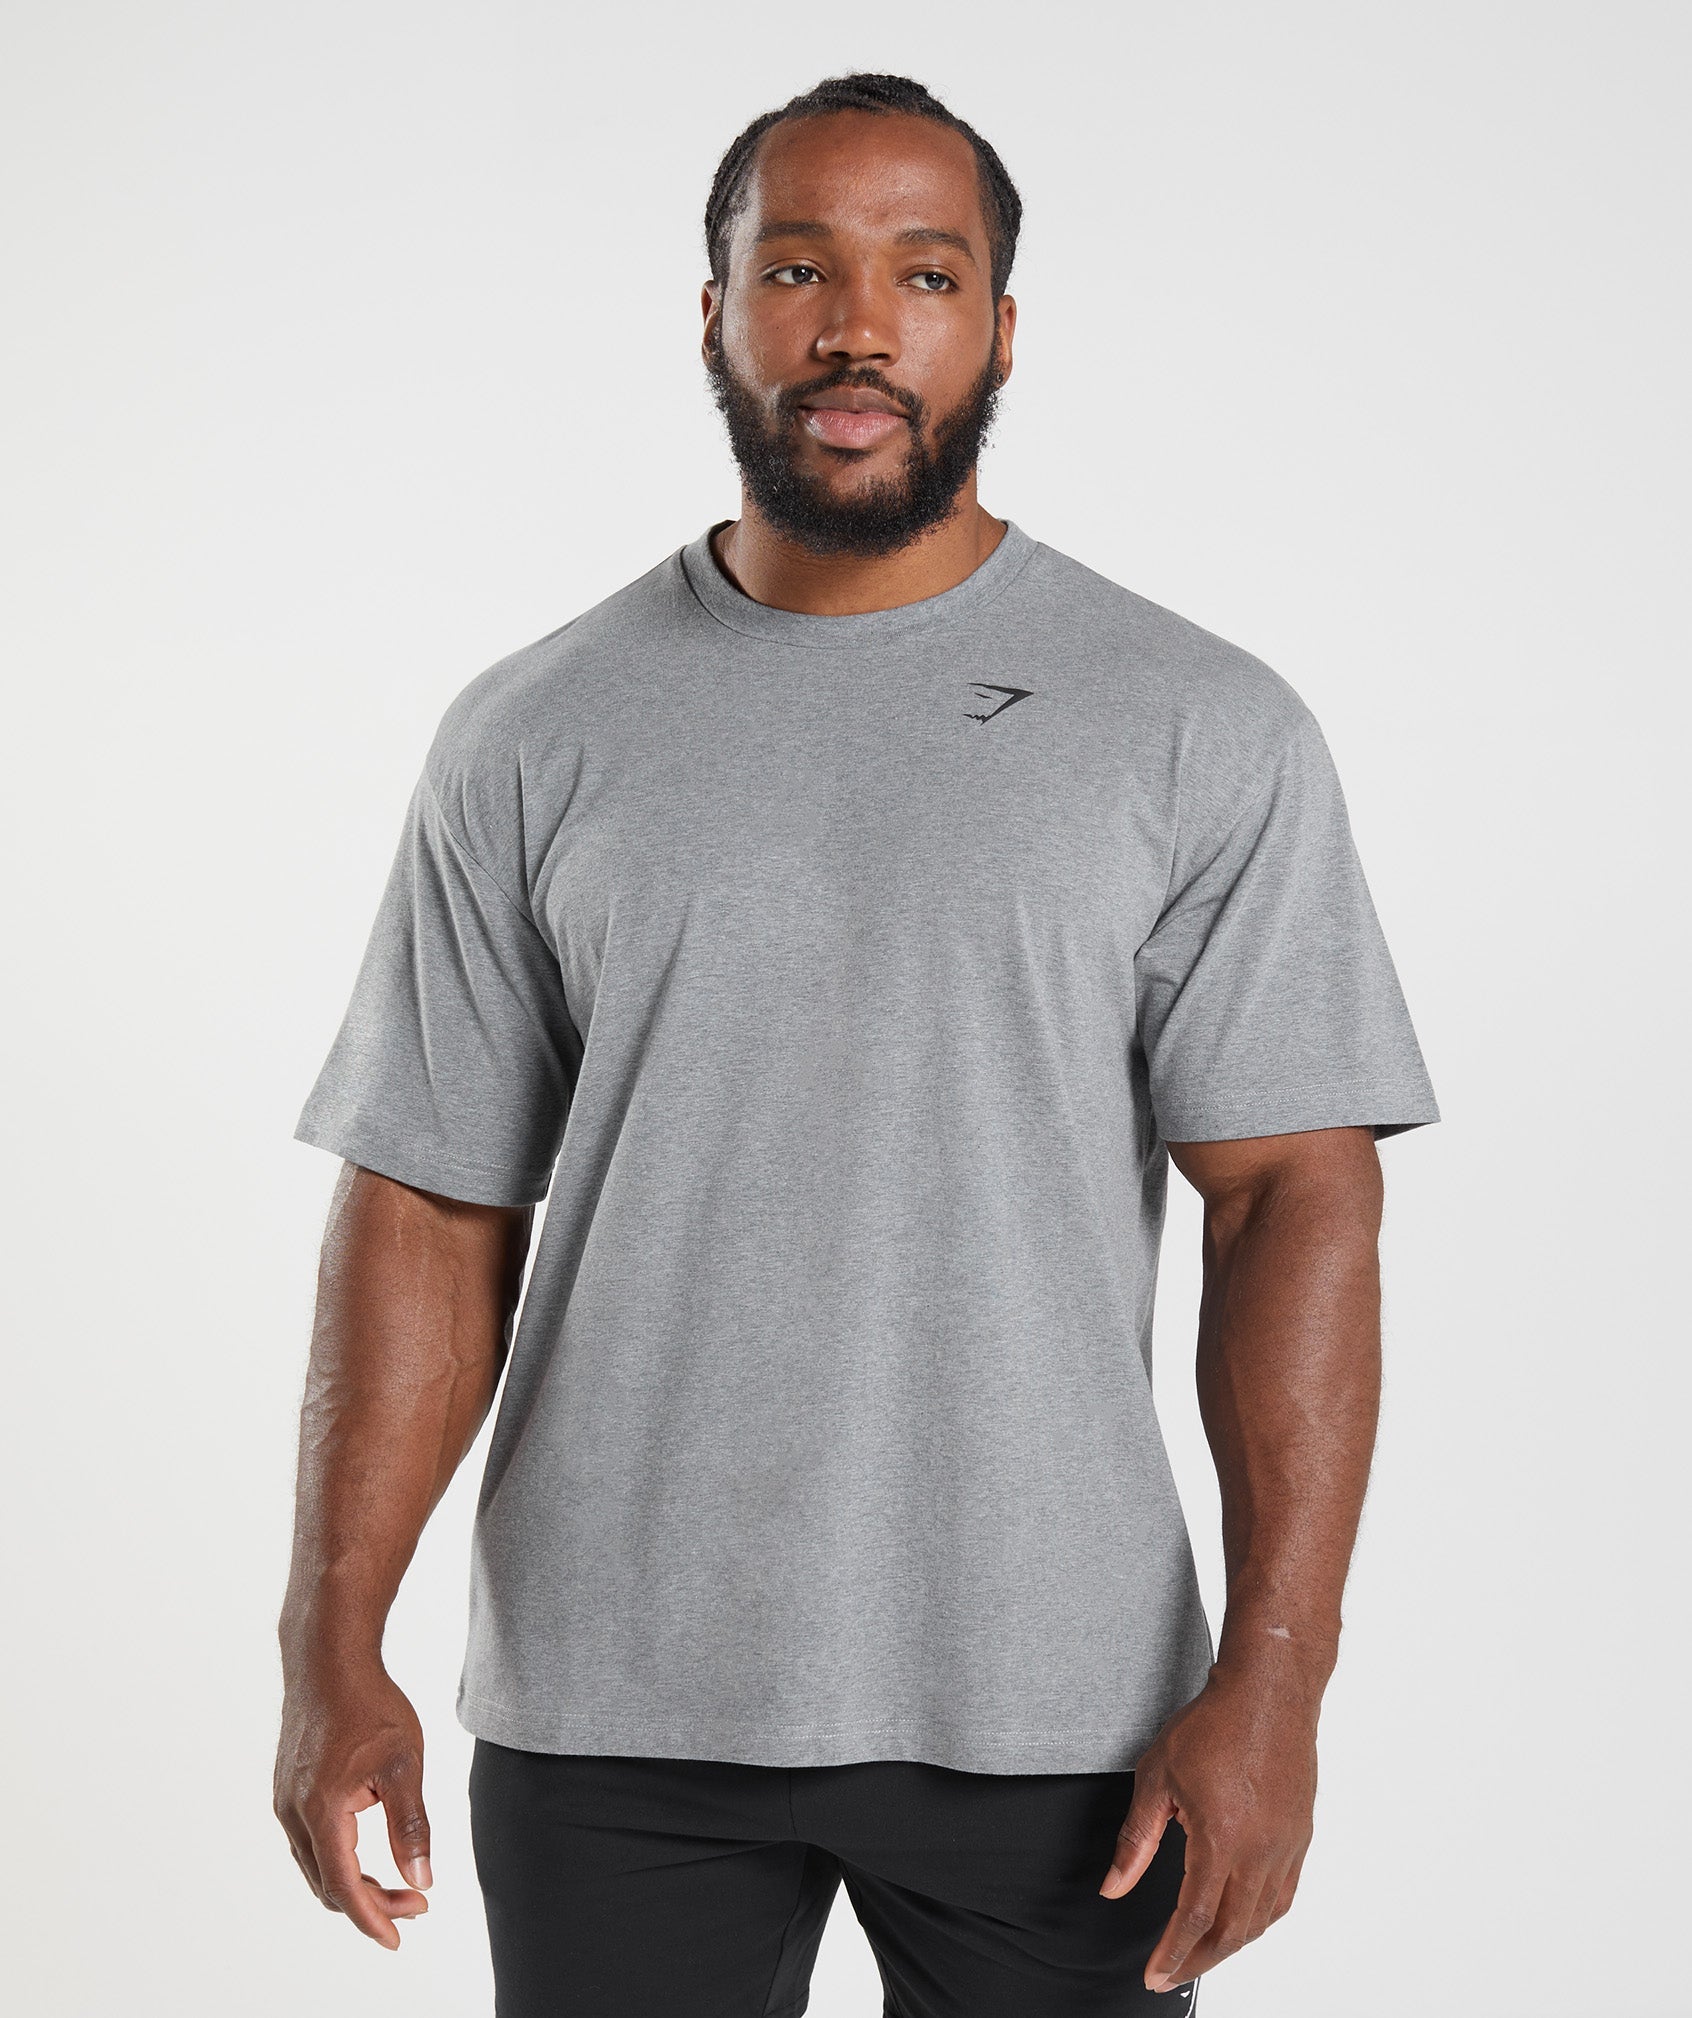 Essential Oversized T-Shirt in Charcoal Marl is out of stock